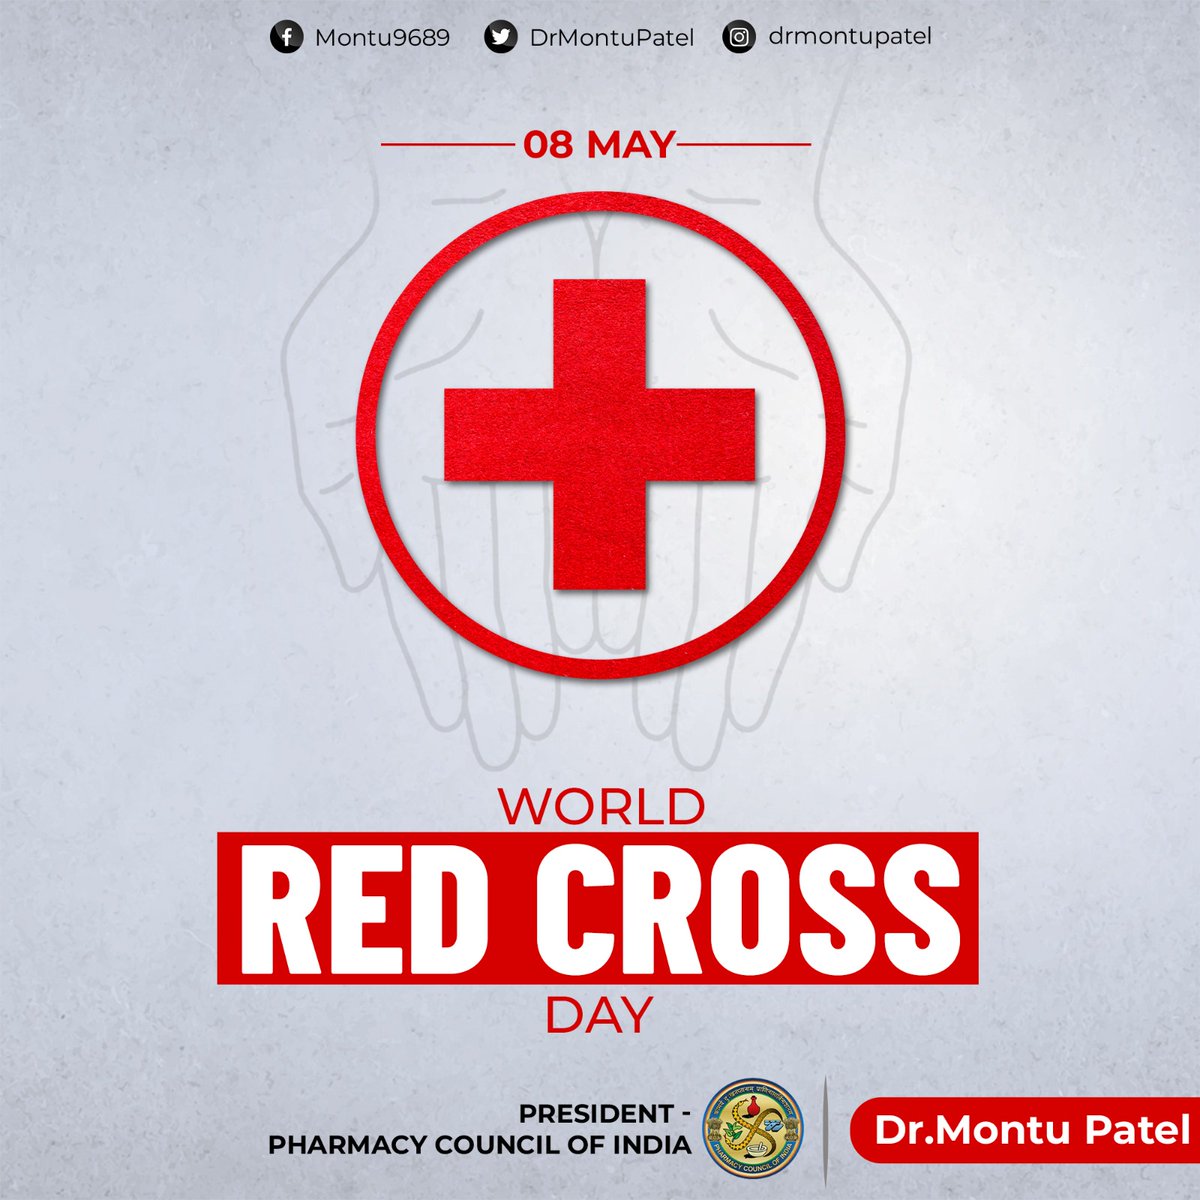 On the occasion of #WorldRedCrossDay , salute to all the Red Cross volunteers who help the needy in difficult times while upholding the values of humanity.